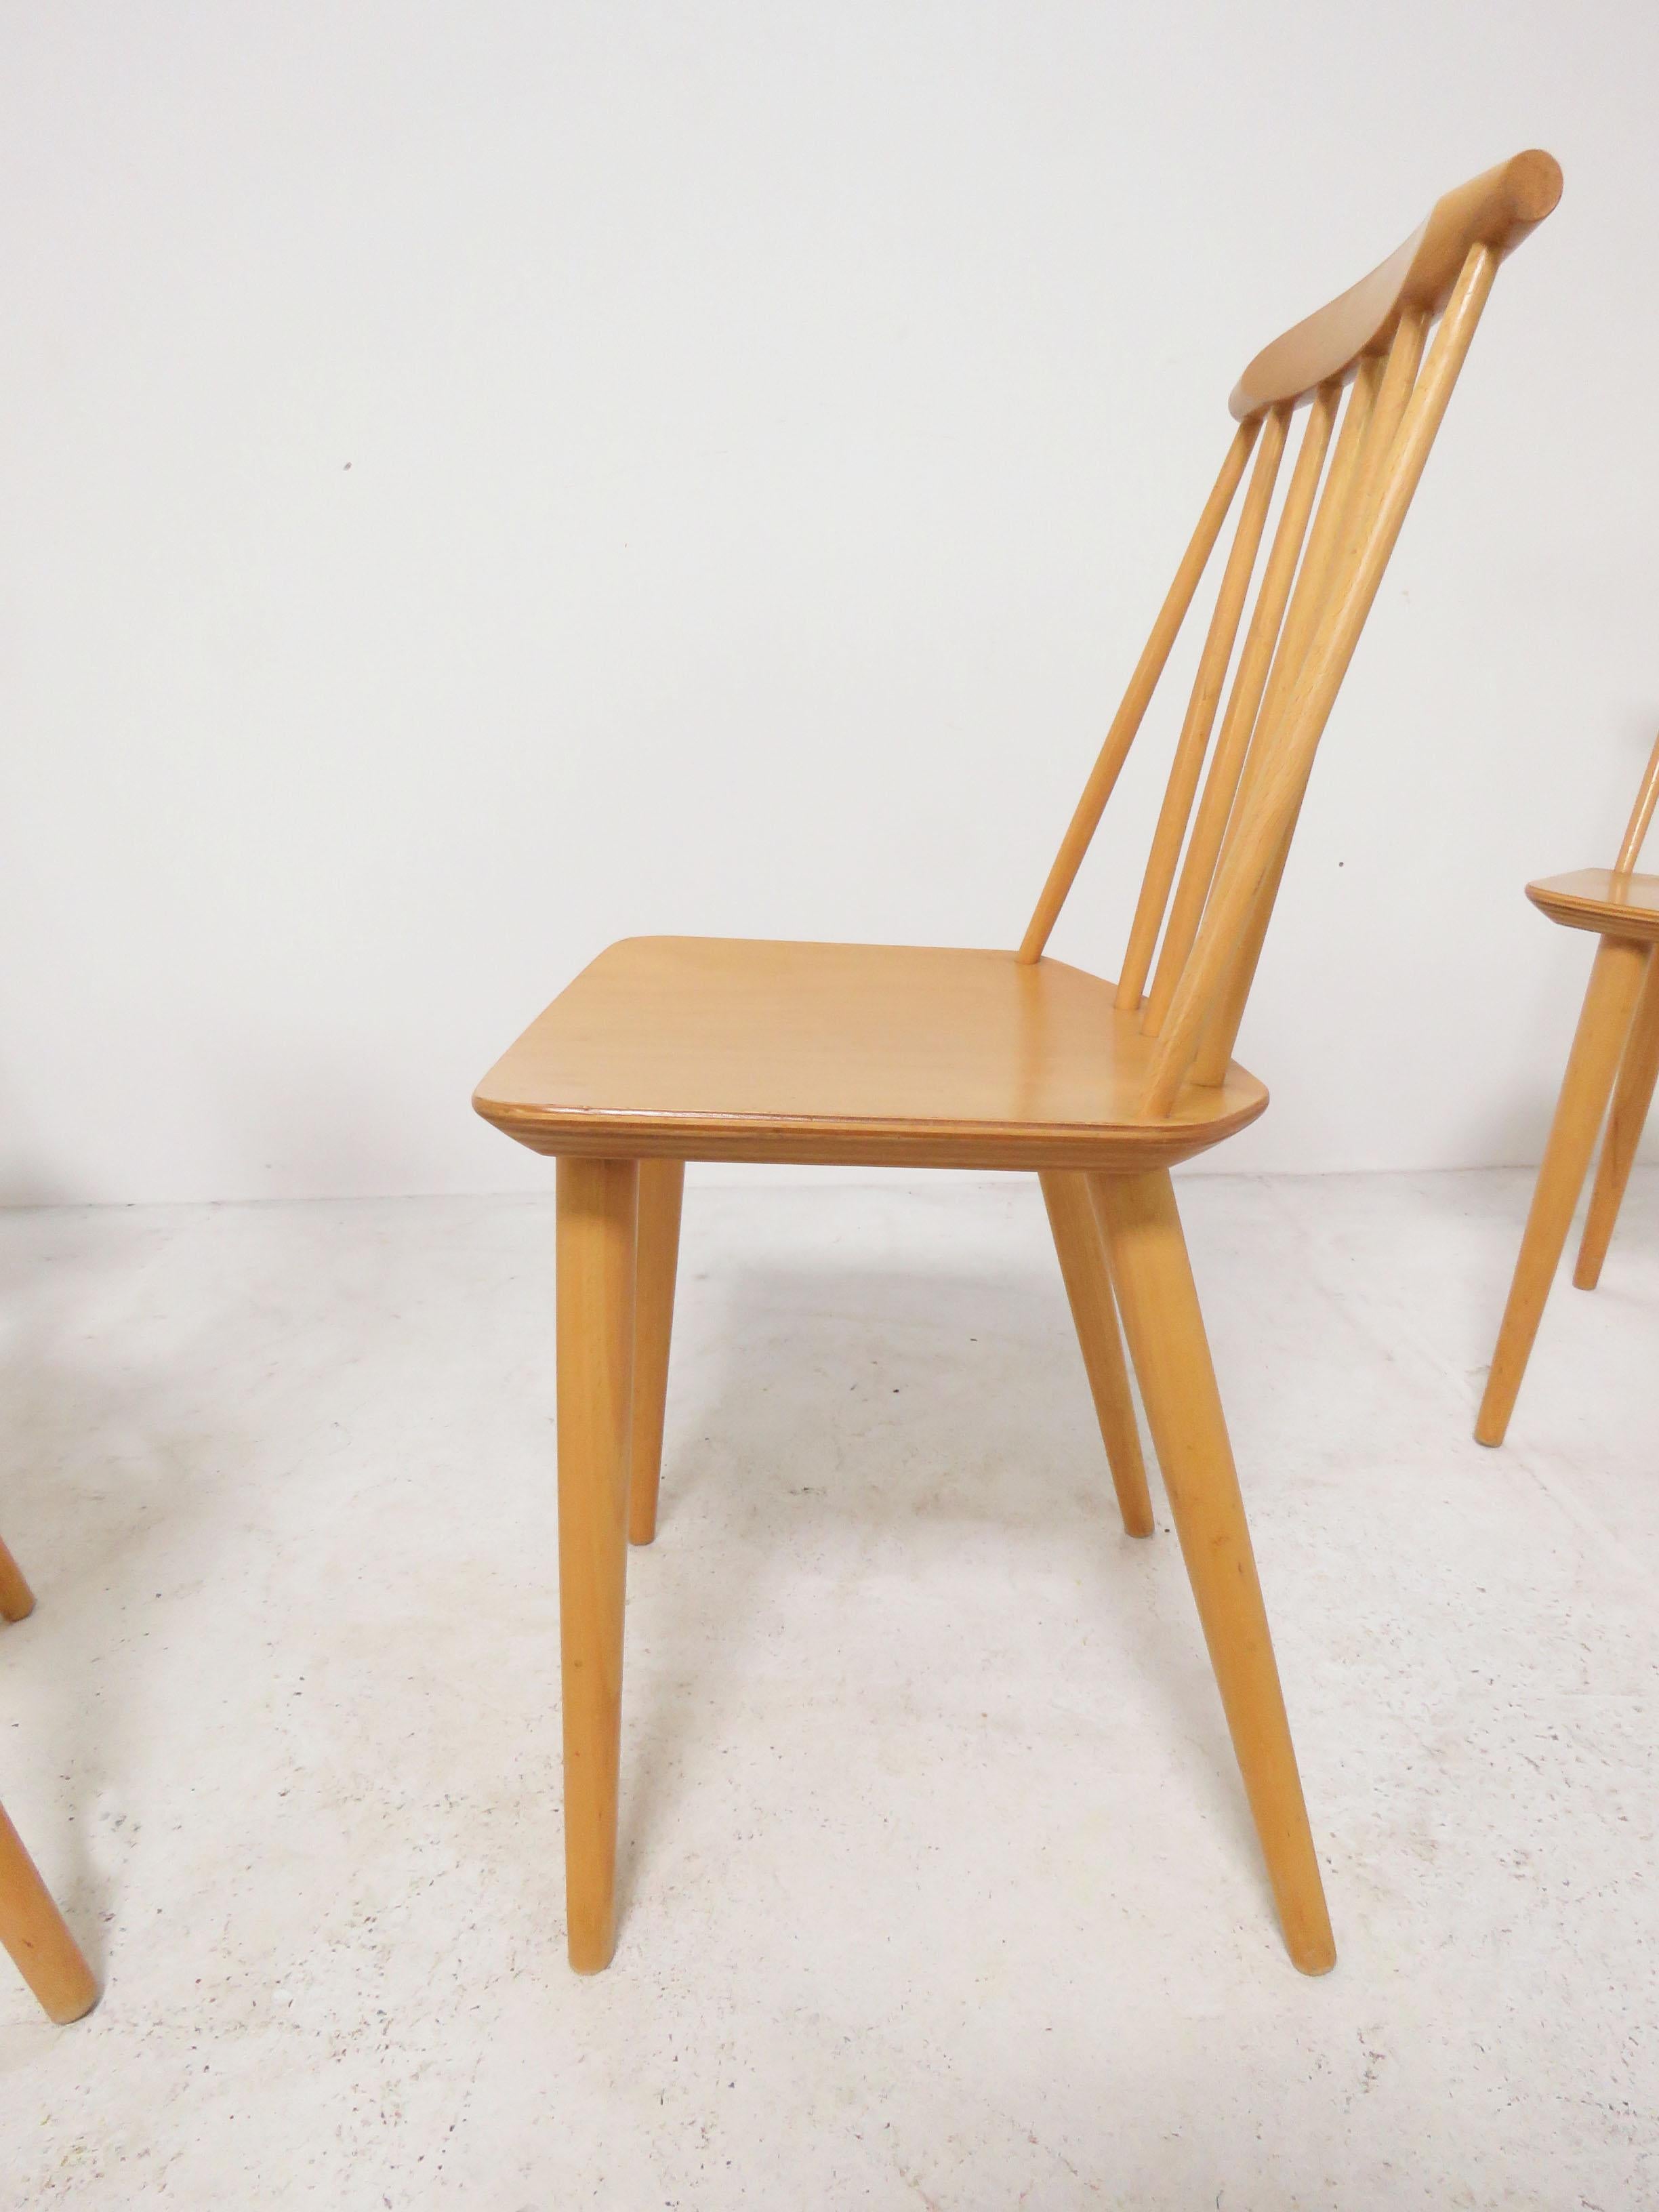 Late 20th Century Set of Four Folke Palsson for Fdb Mobler, Denmark Dining Chairs, circa 1975